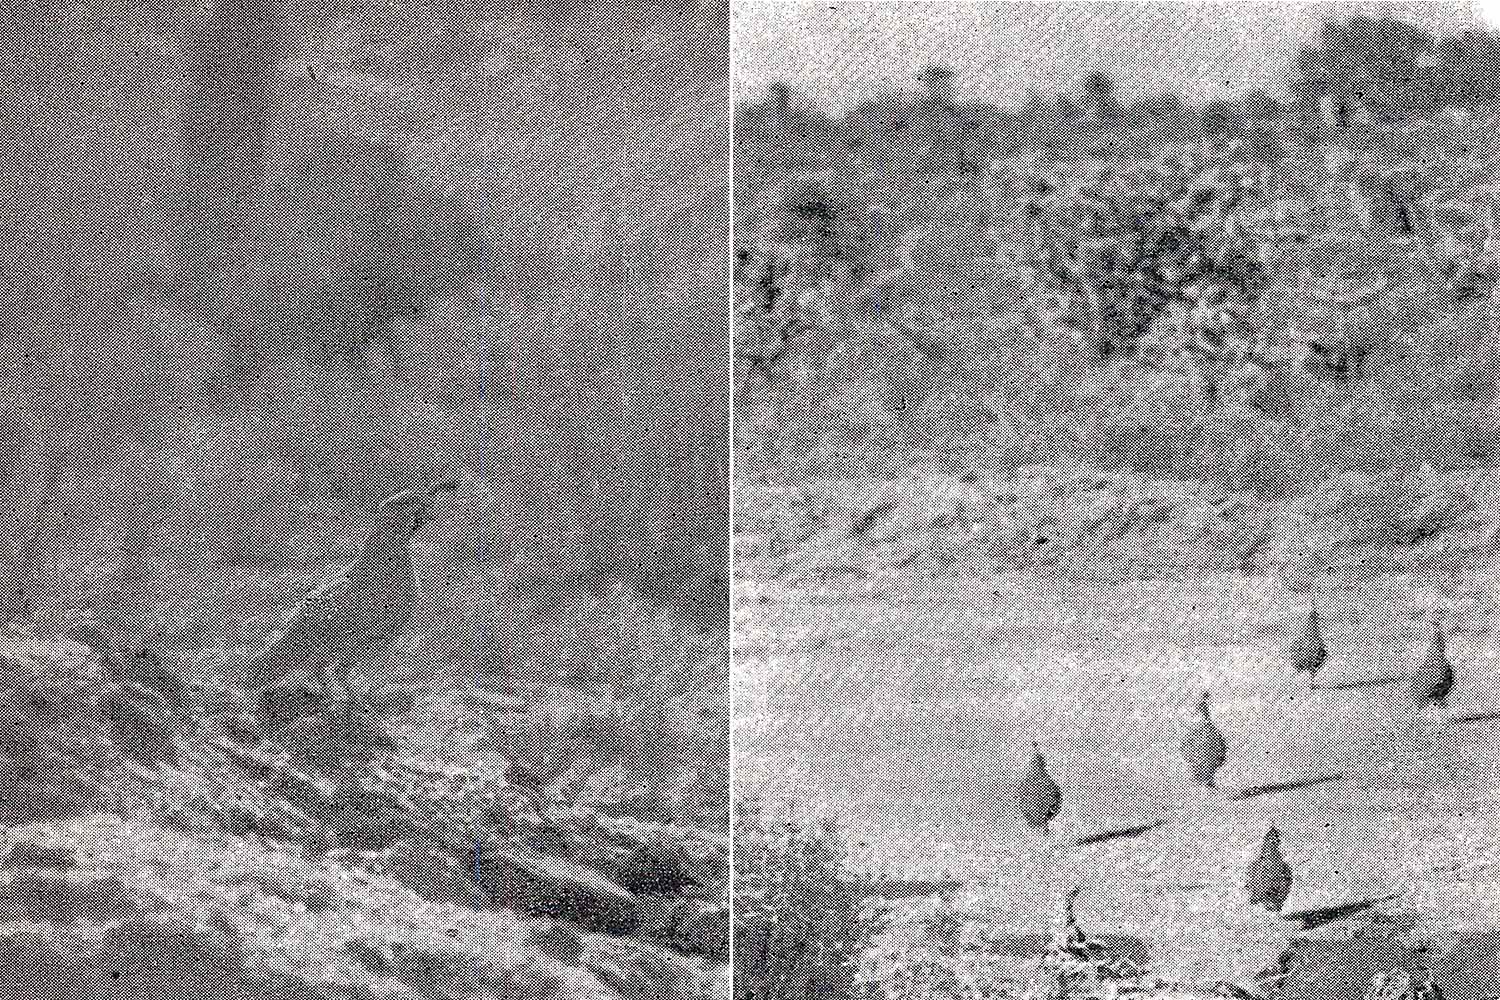 Single quail perches on rocky hillside, keeping watch; group of quail cross road. Archival photographs.